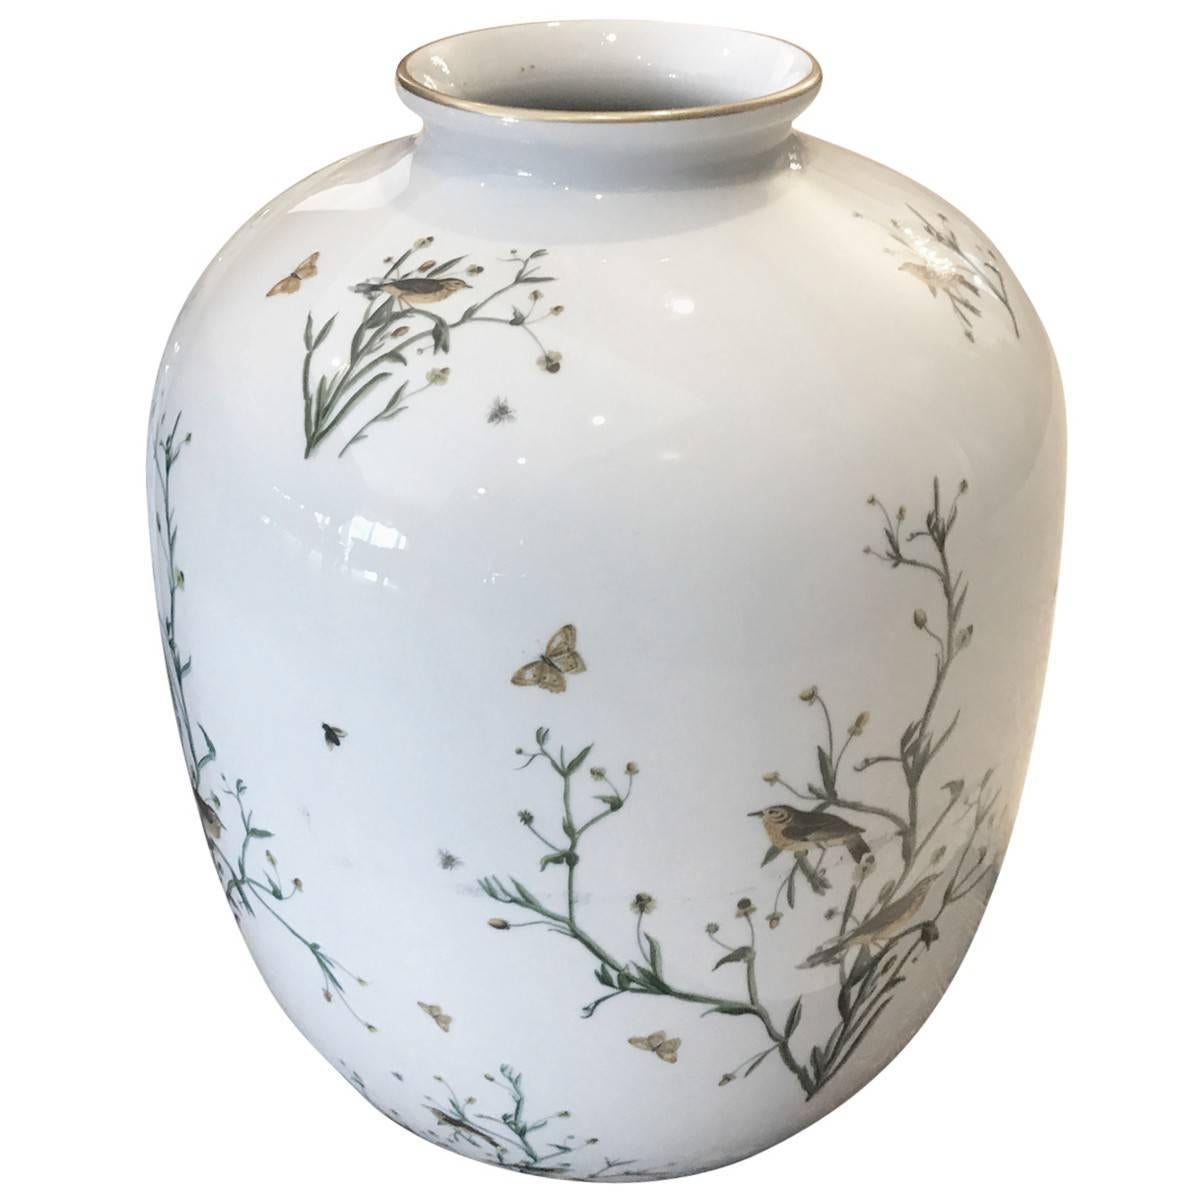 Pair of antique Rosenthal vases. Rosenthal is a leading distributer of fine china and glassware. Sleek and sculptural, this stunning pair of porcelain vases is decorated with songbirds, plants, and butterflies. Maker’s marks ensure authenticity,